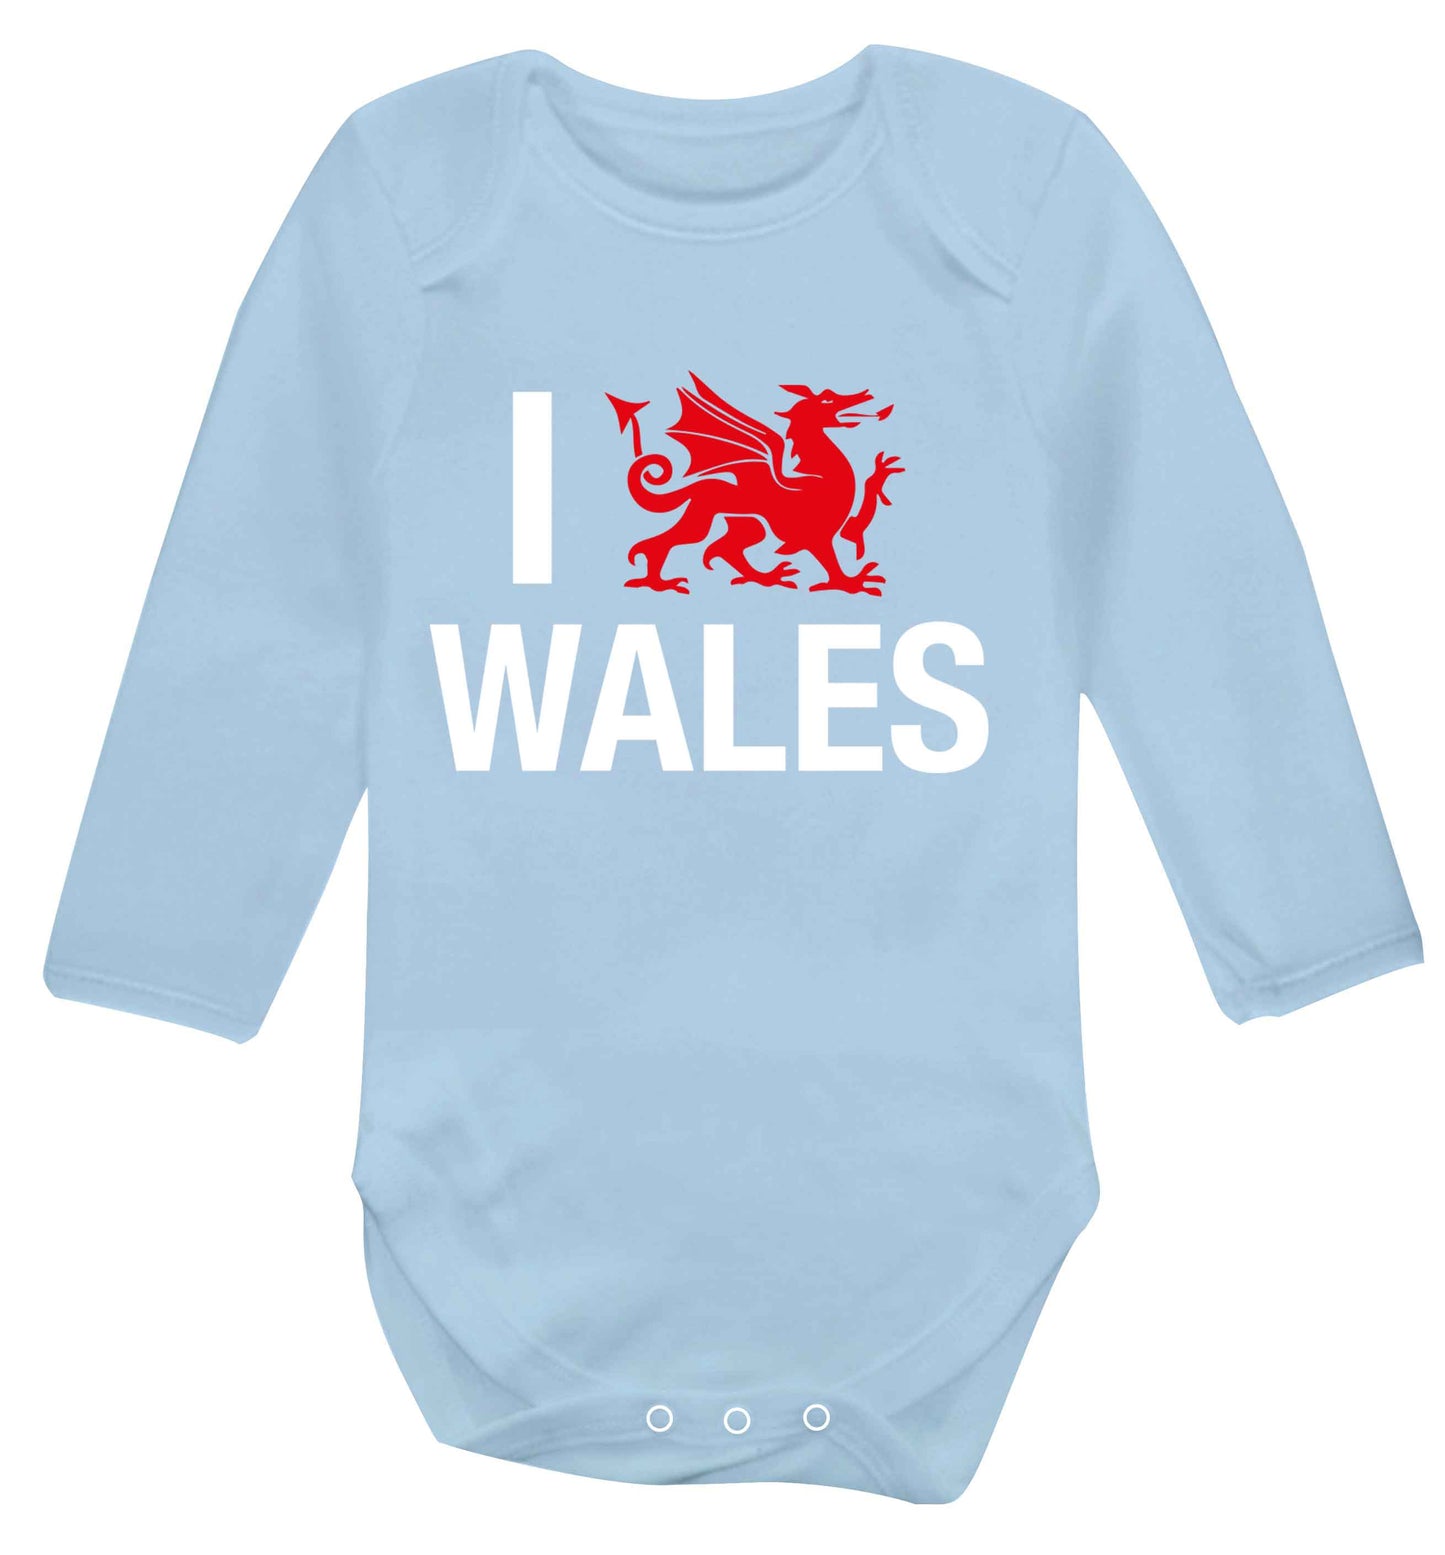 I love Wales Baby Vest long sleeved pale blue 6-12 months